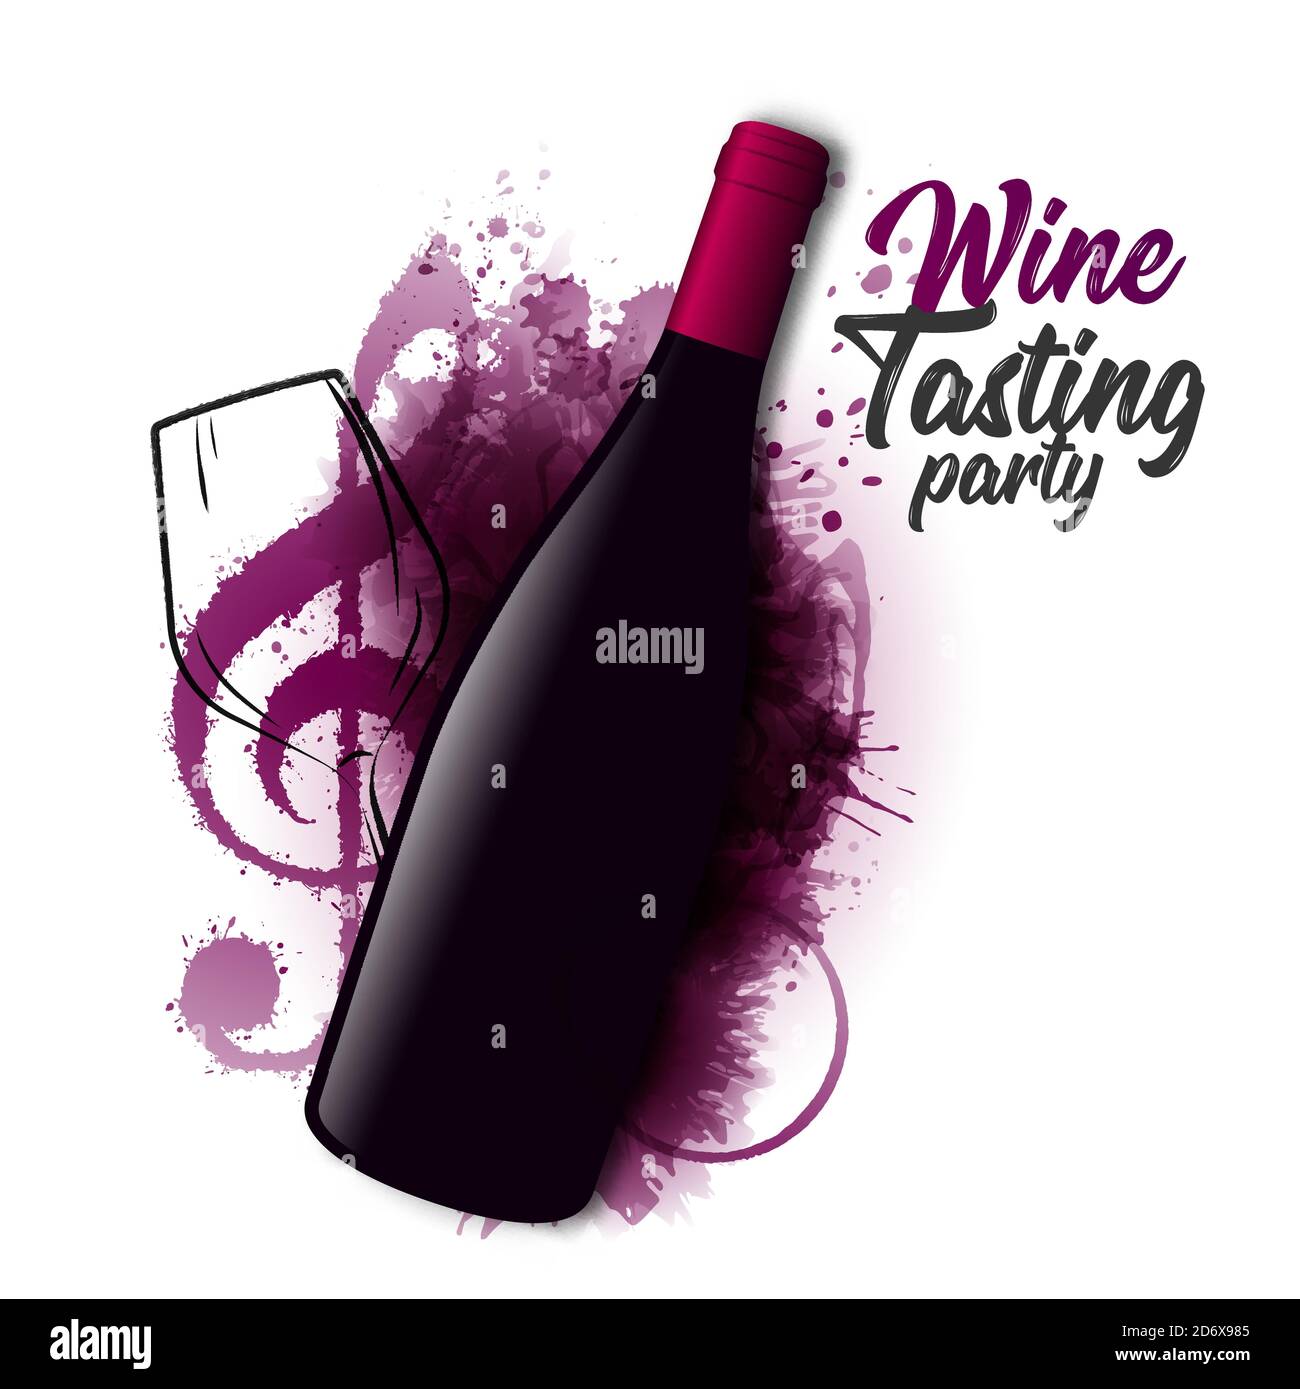 three-dimensional bottle illustration, wine glass and music symbol. Artistic illustration with red wine stains in the background. Poster, cover, ad, f Stock Vector